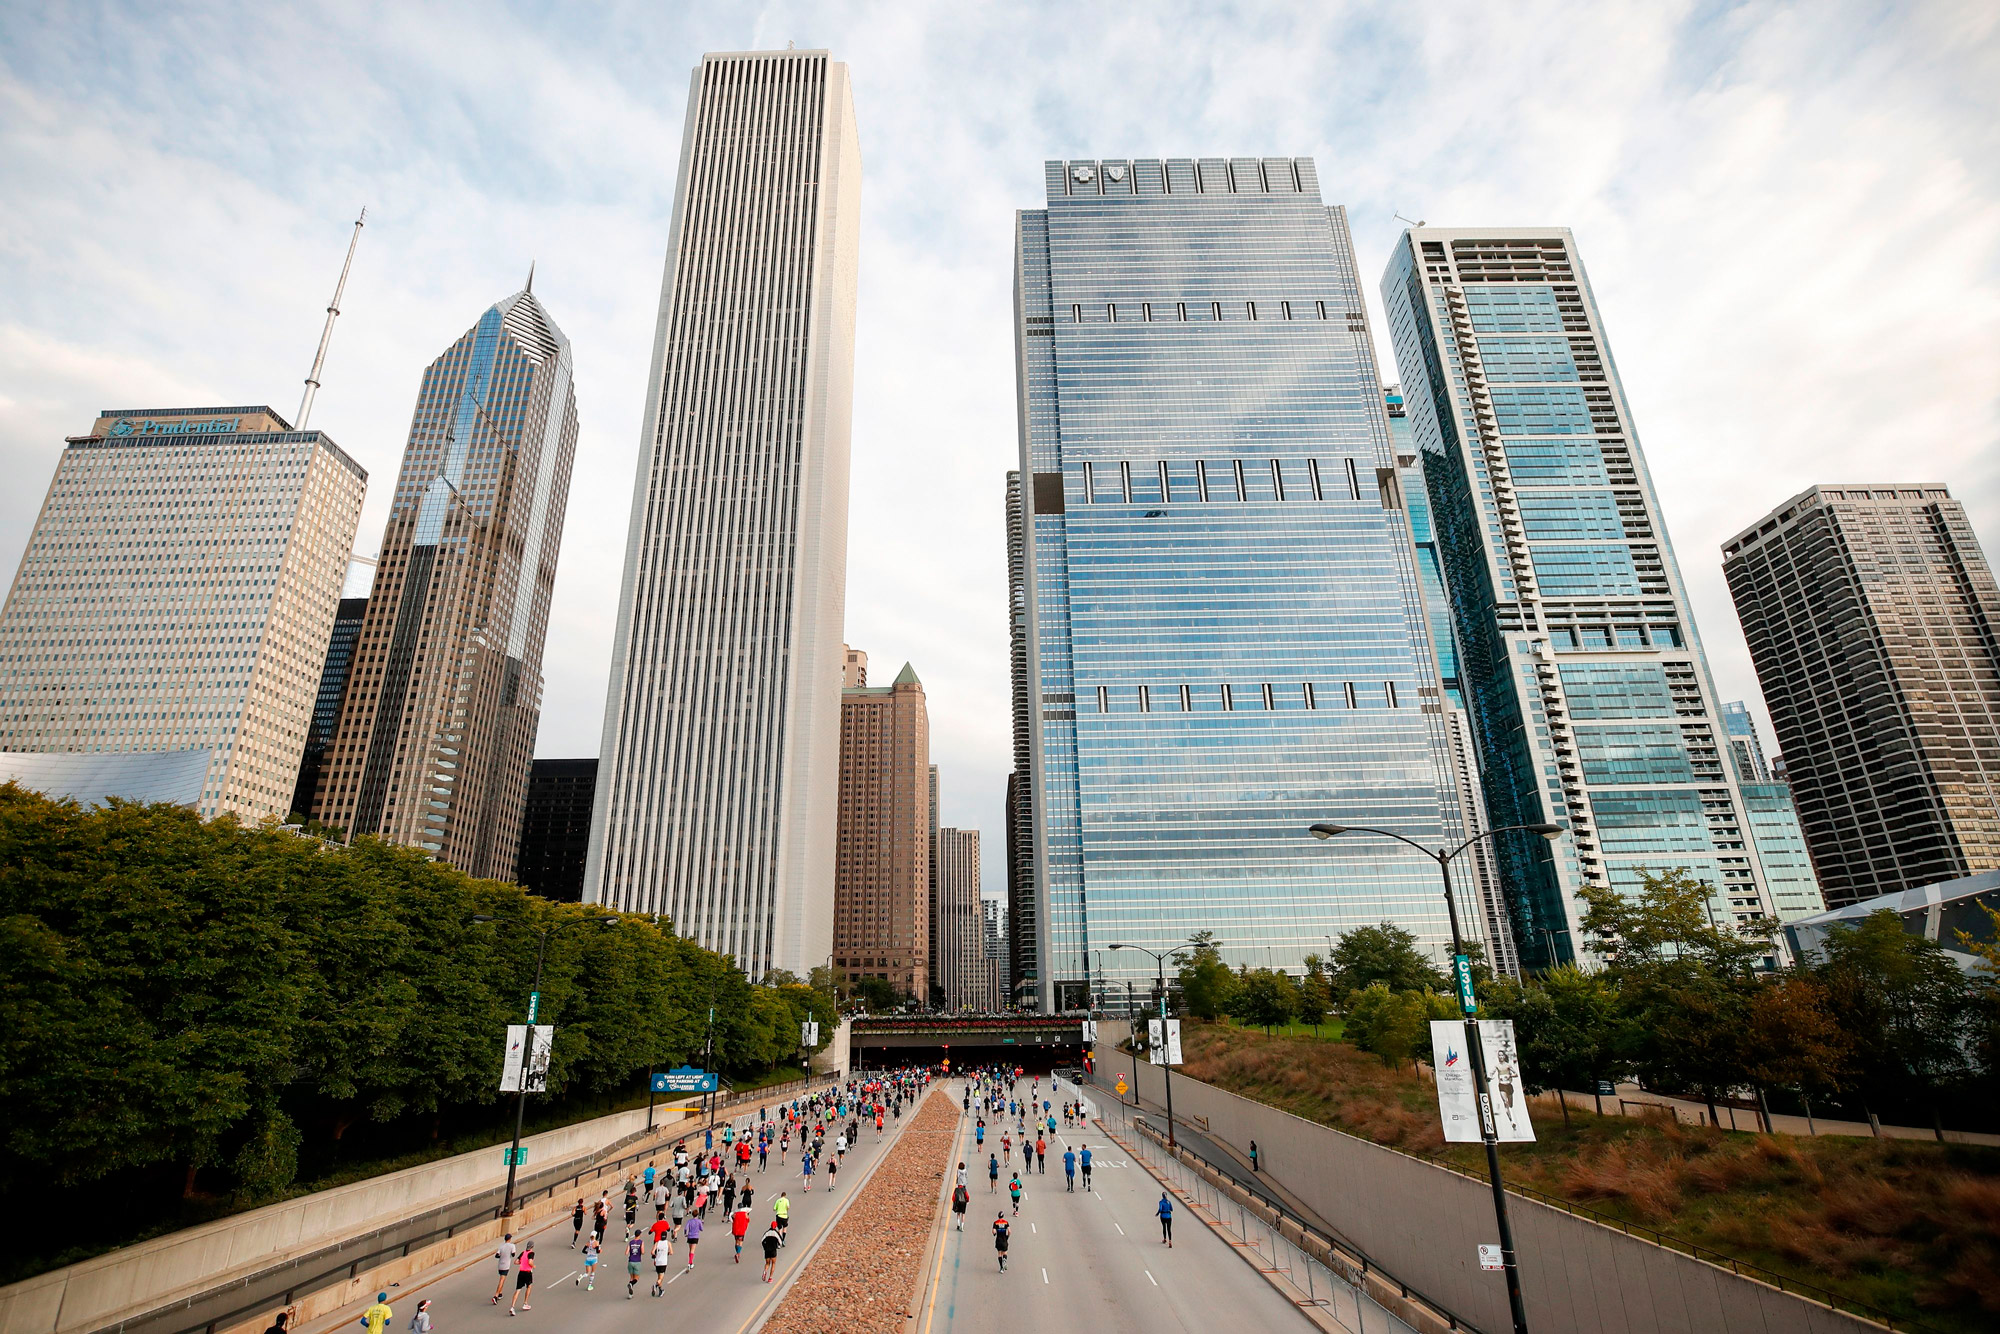 Runners compete during the 2019 Bank of America Chicago Marathon on October 13, 2019 in Chicago.